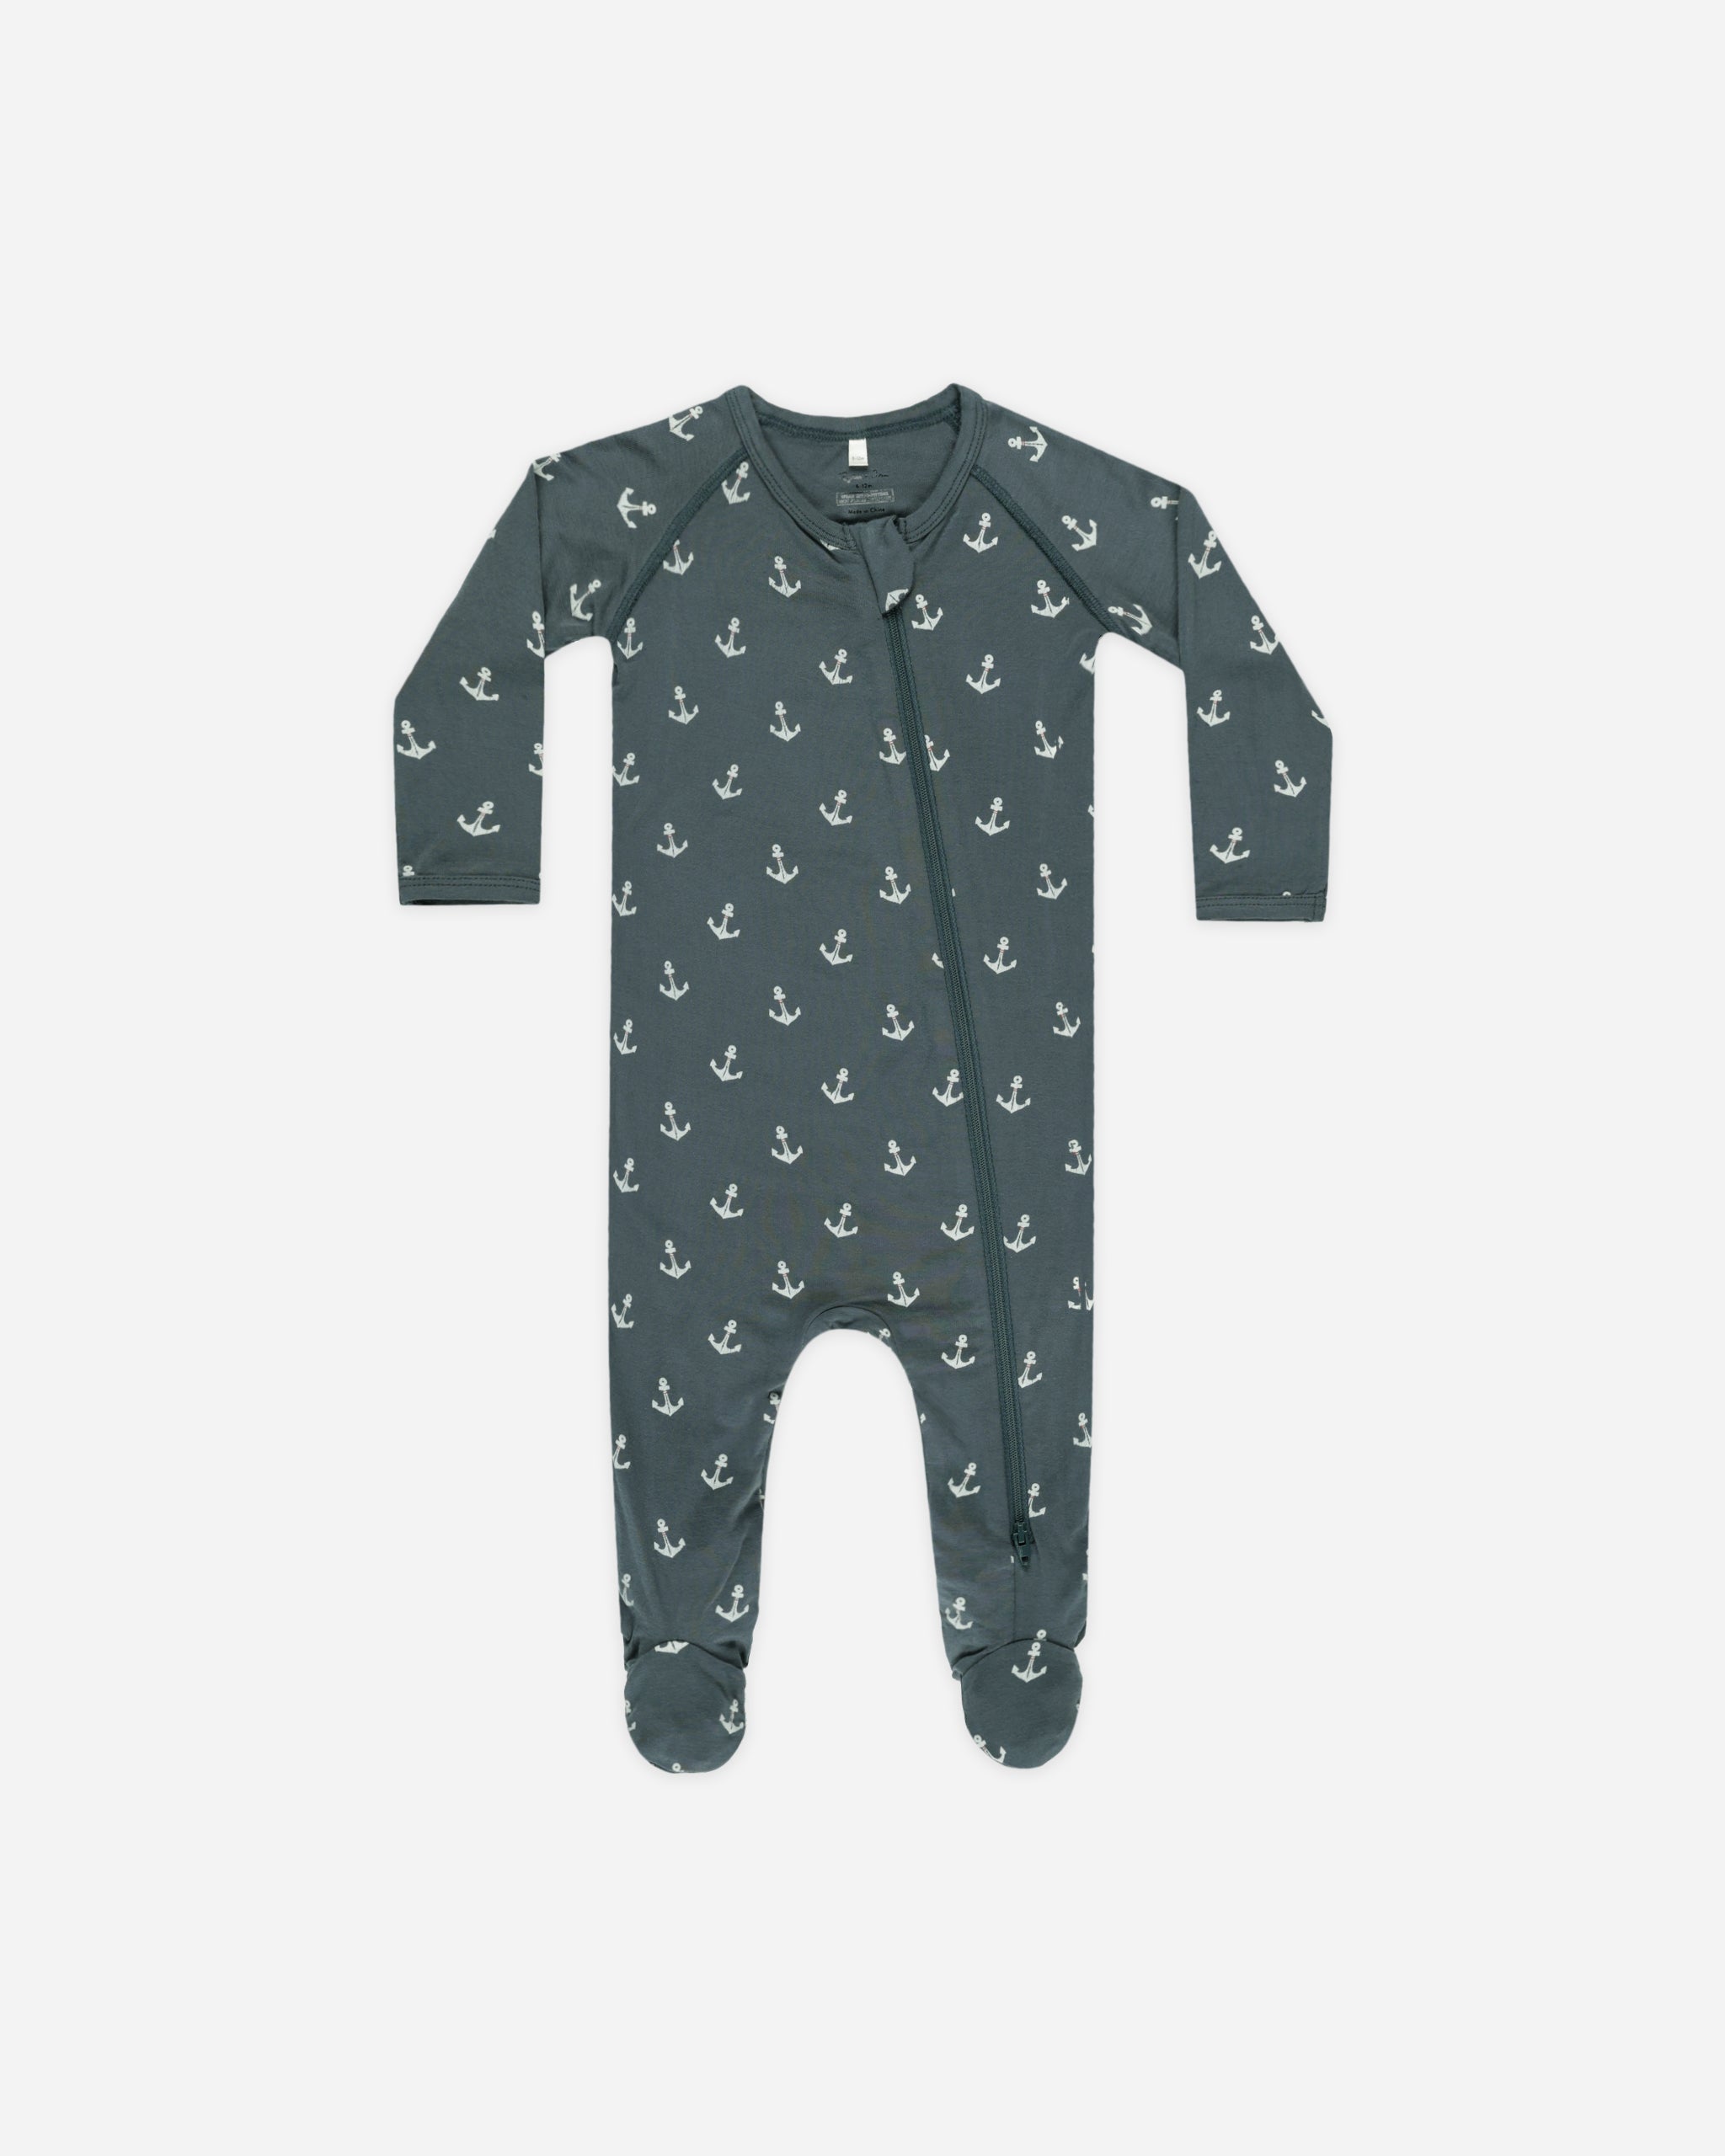 Footed Sleeper || Anchors - Rylee + Cru | Kids Clothes | Trendy Baby Clothes | Modern Infant Outfits |